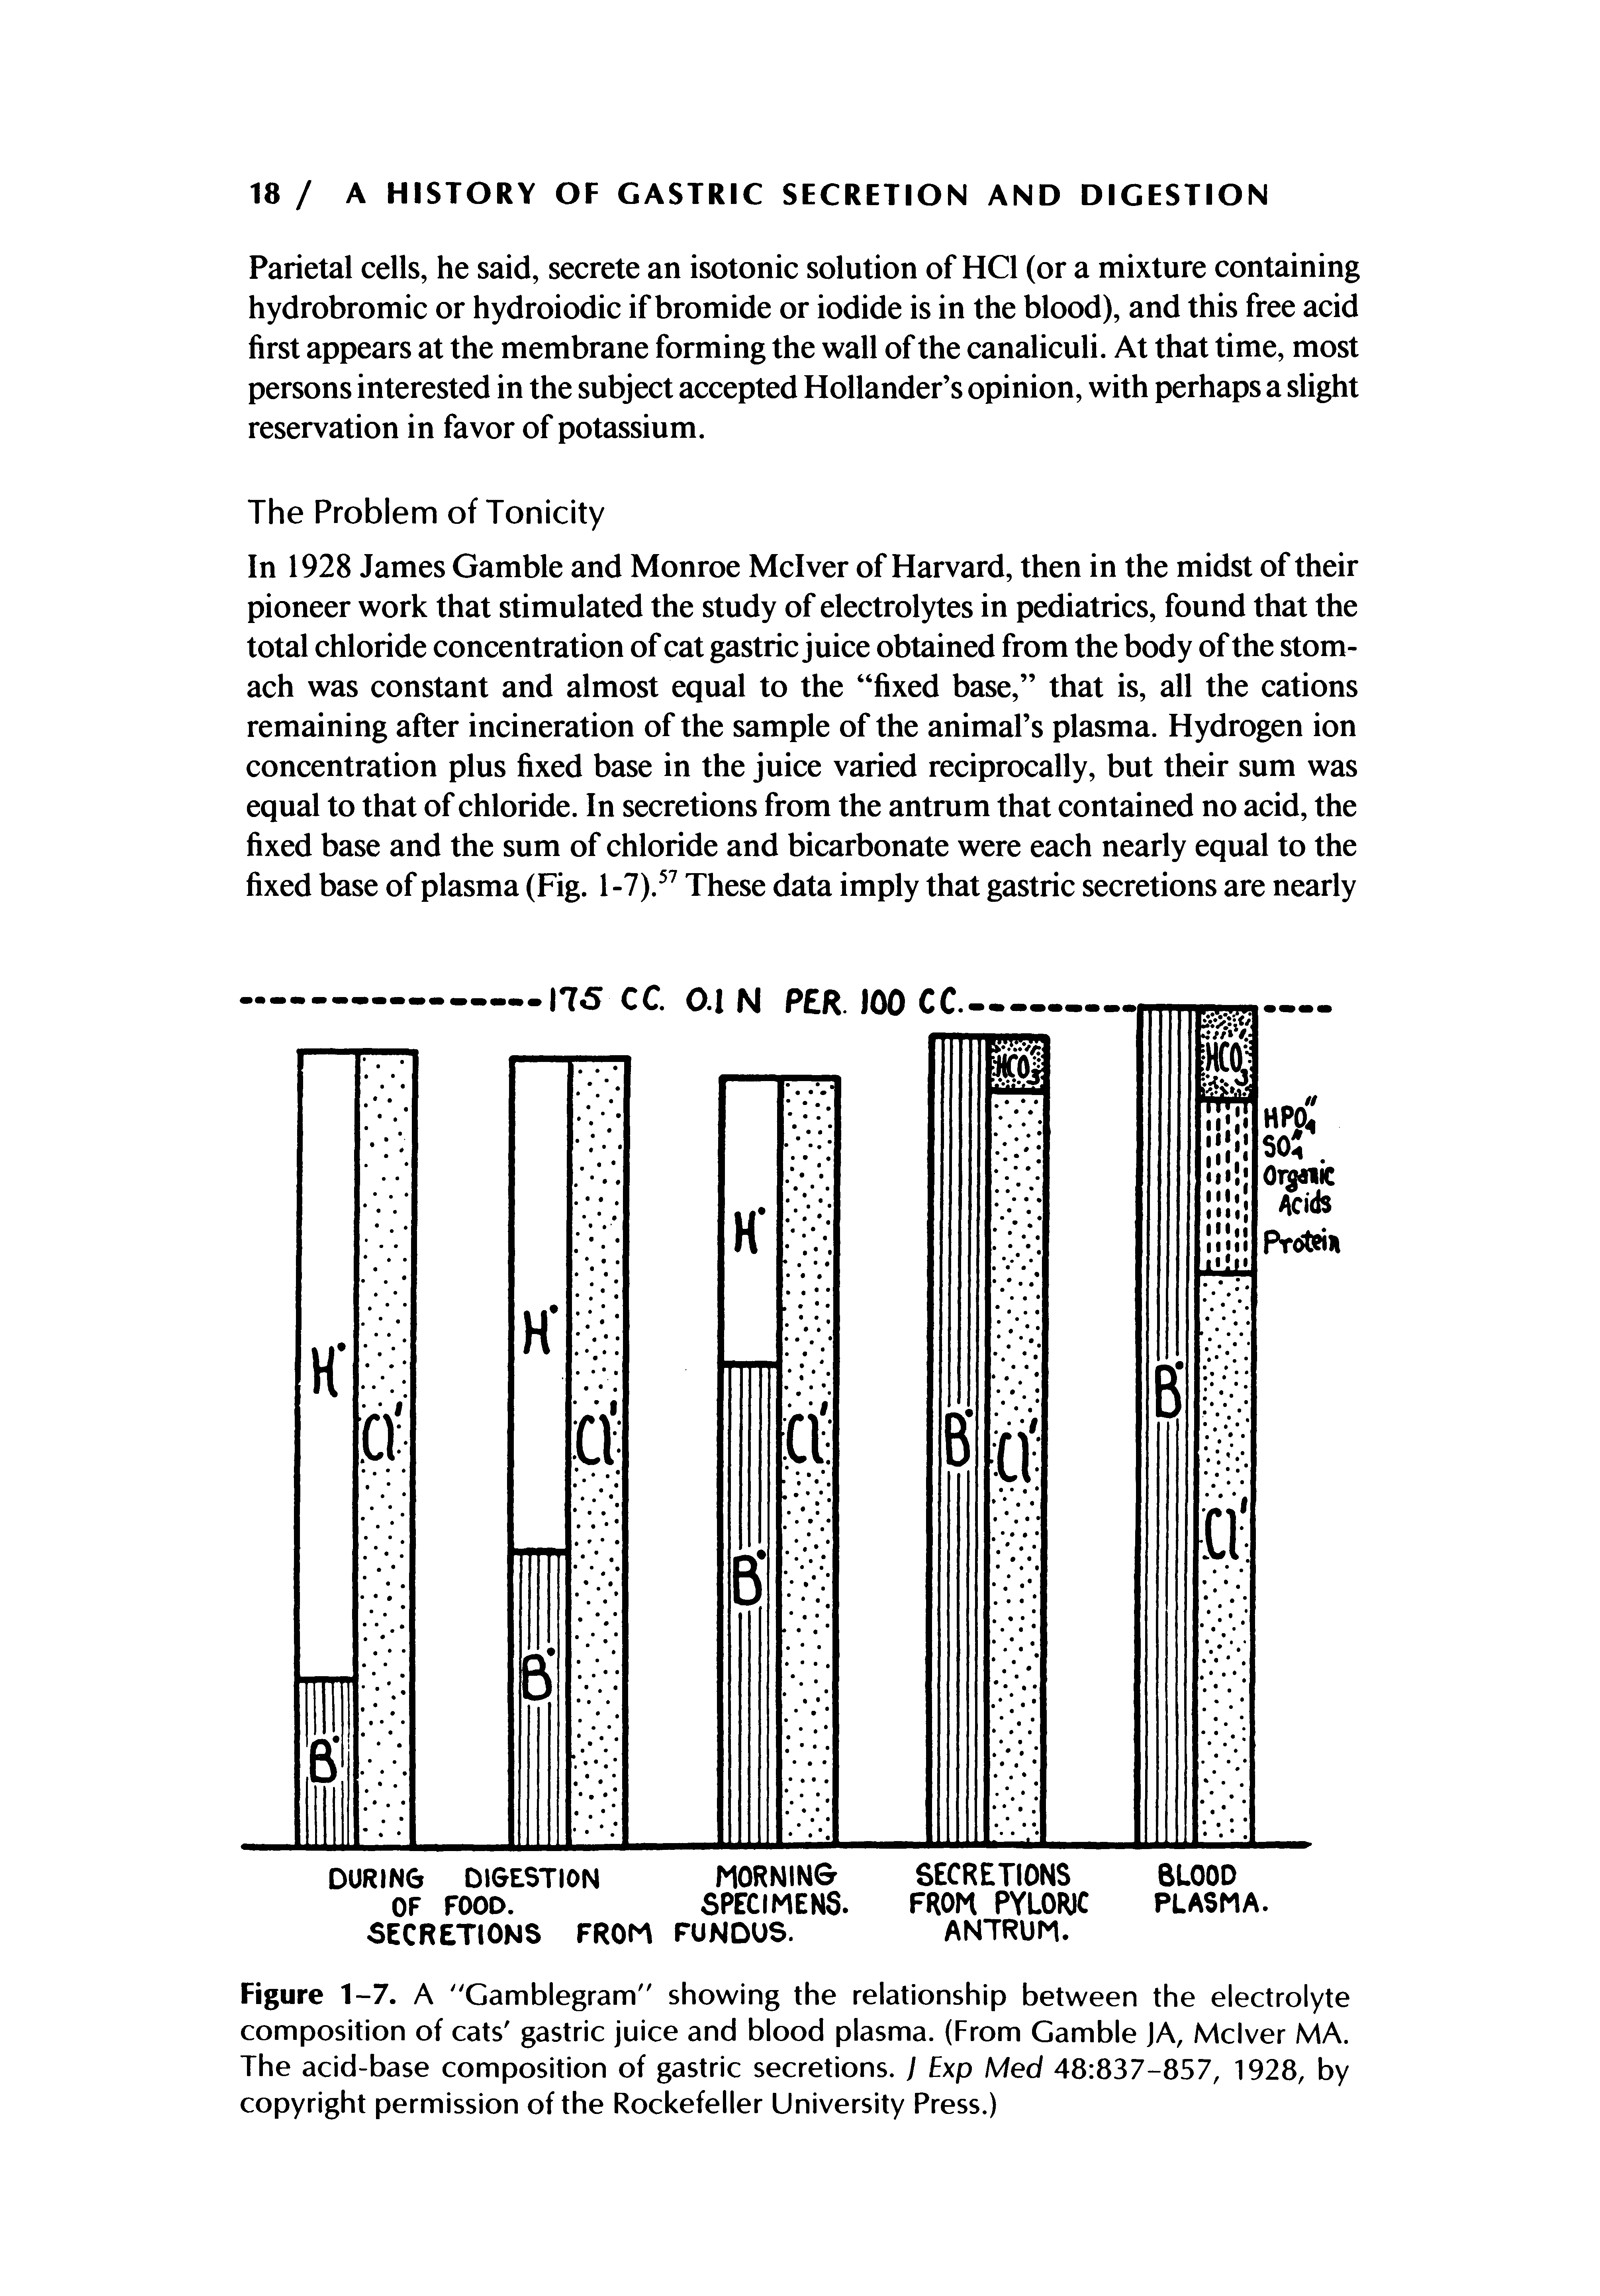 Figure 1-7. A "Gamblegram" showing the relationship between the electrolyte composition of cats gastric juice and blood plasma. (From Gamble JA, Mclver MA. The acid-base composition of gastric secretions. I Exp Med 48 837-857, 1928, by copyright permission of the Rockefeller University Press.)...